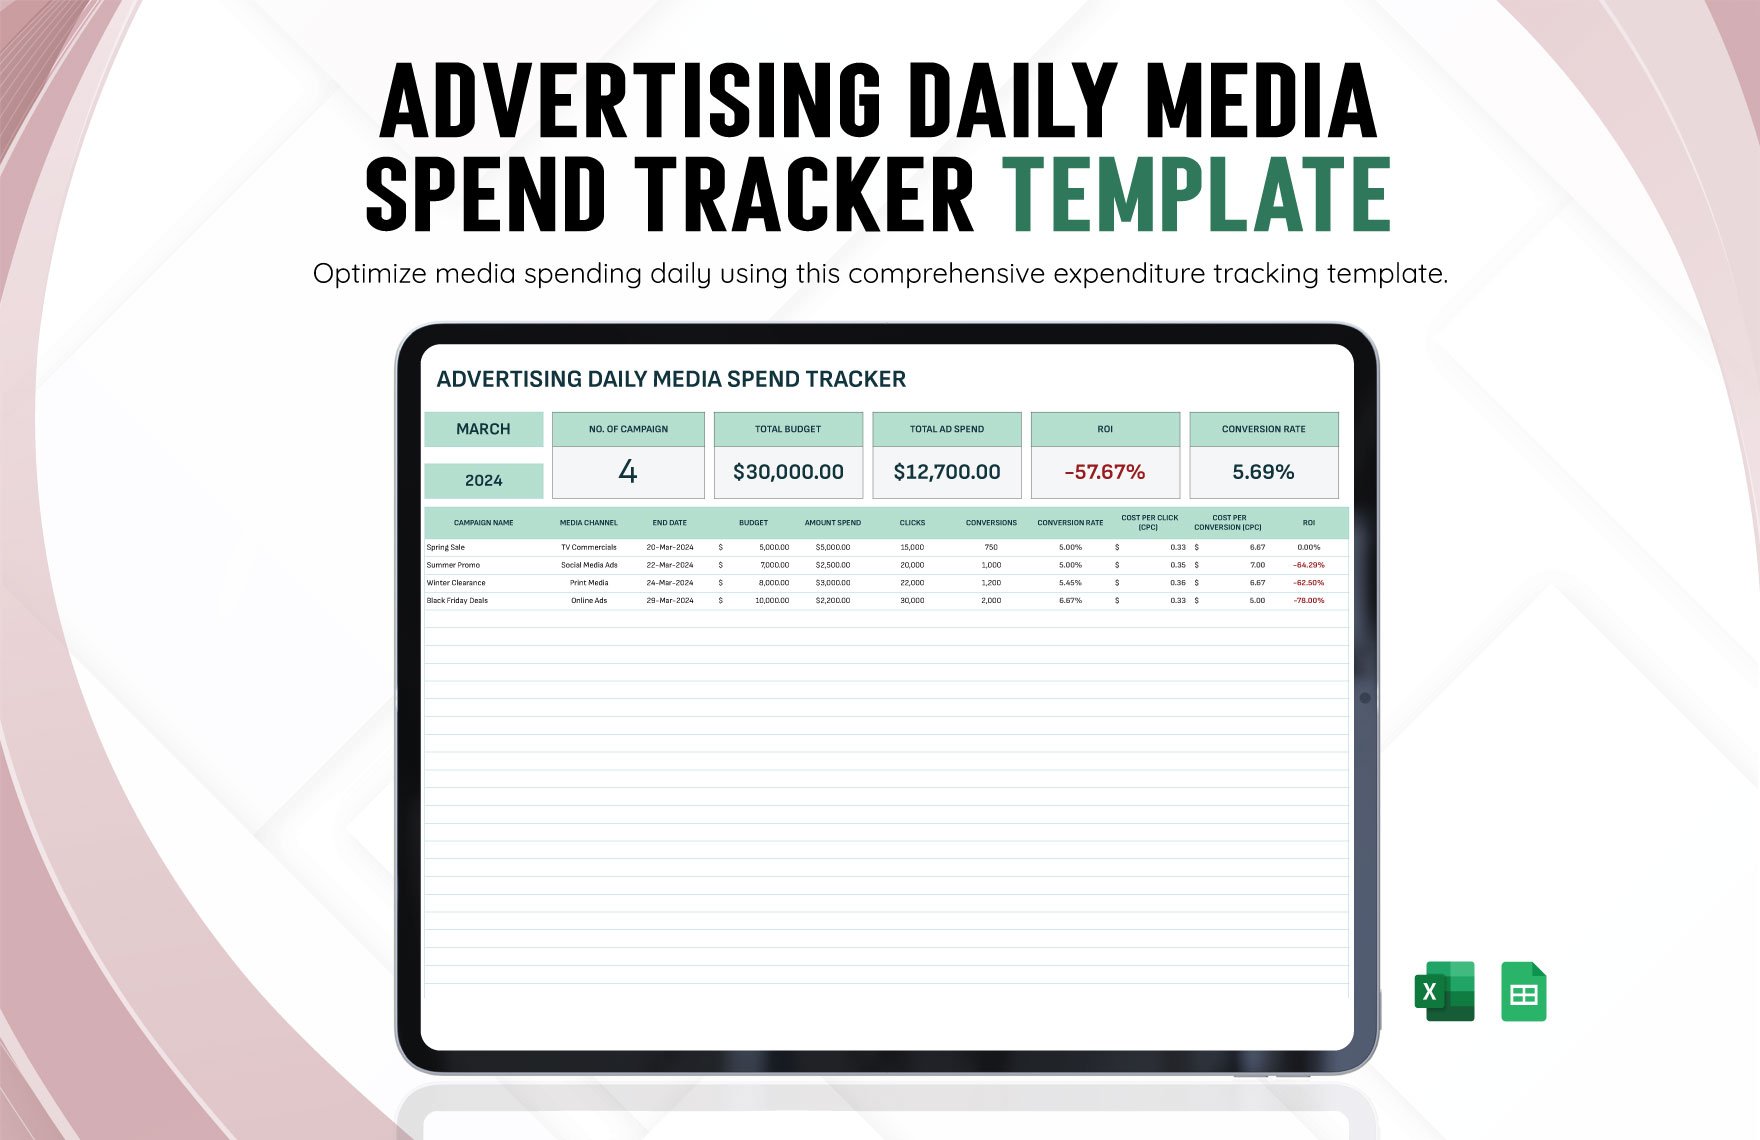 Advertising Daily Media Spend Tracker Template in Excel, Google Sheets